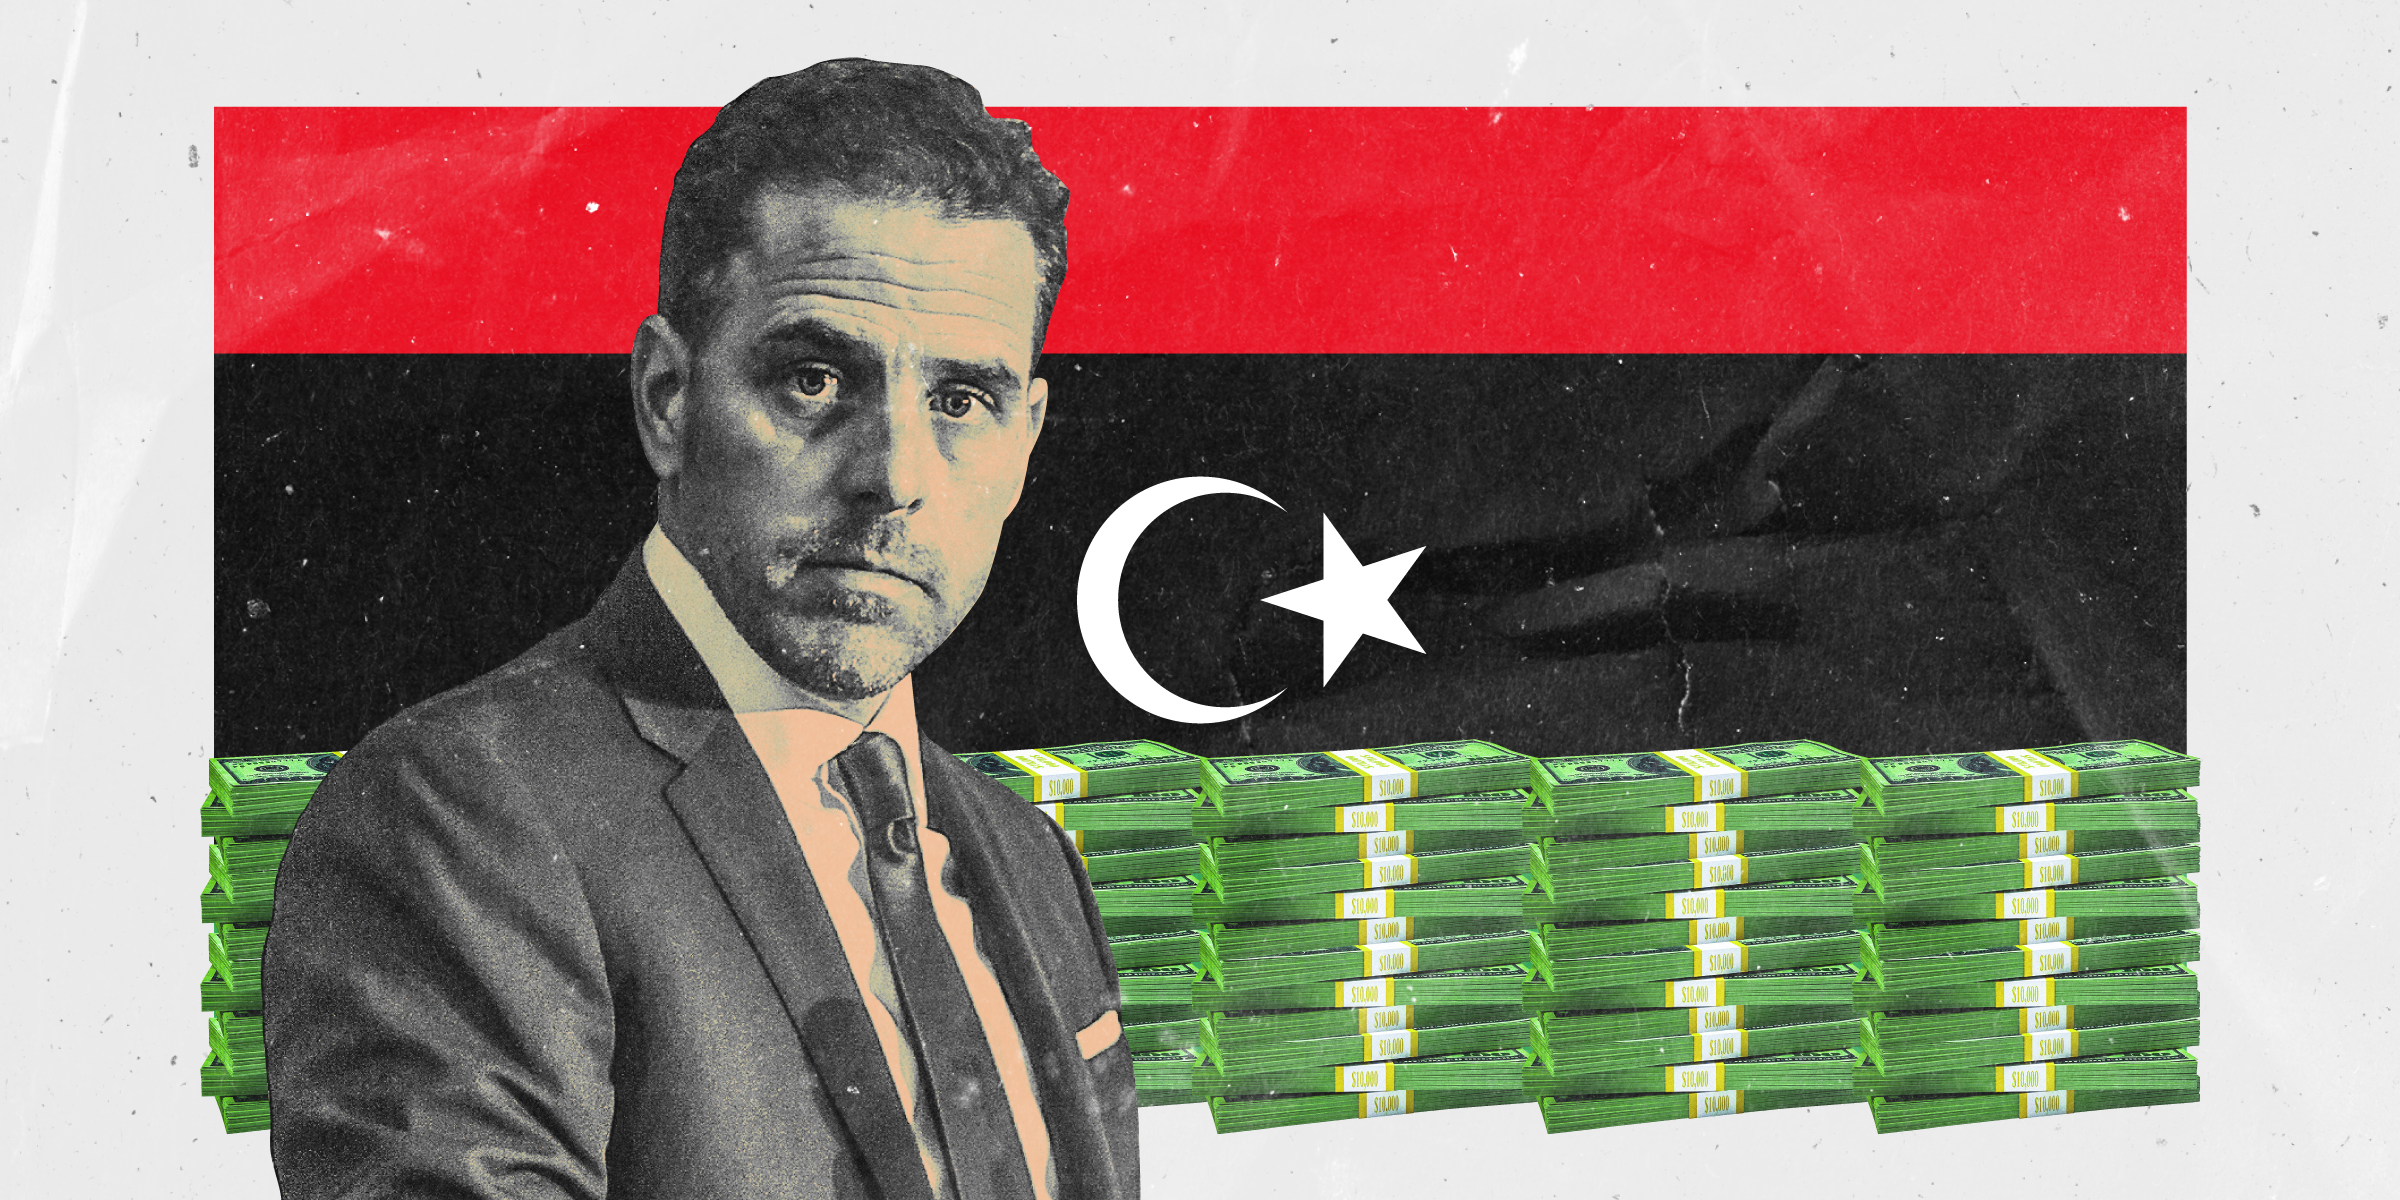 Hunter Biden with the flag of Libya behind him. Stacks of money fill the green portion of the Libyan flag. The background color is gray.